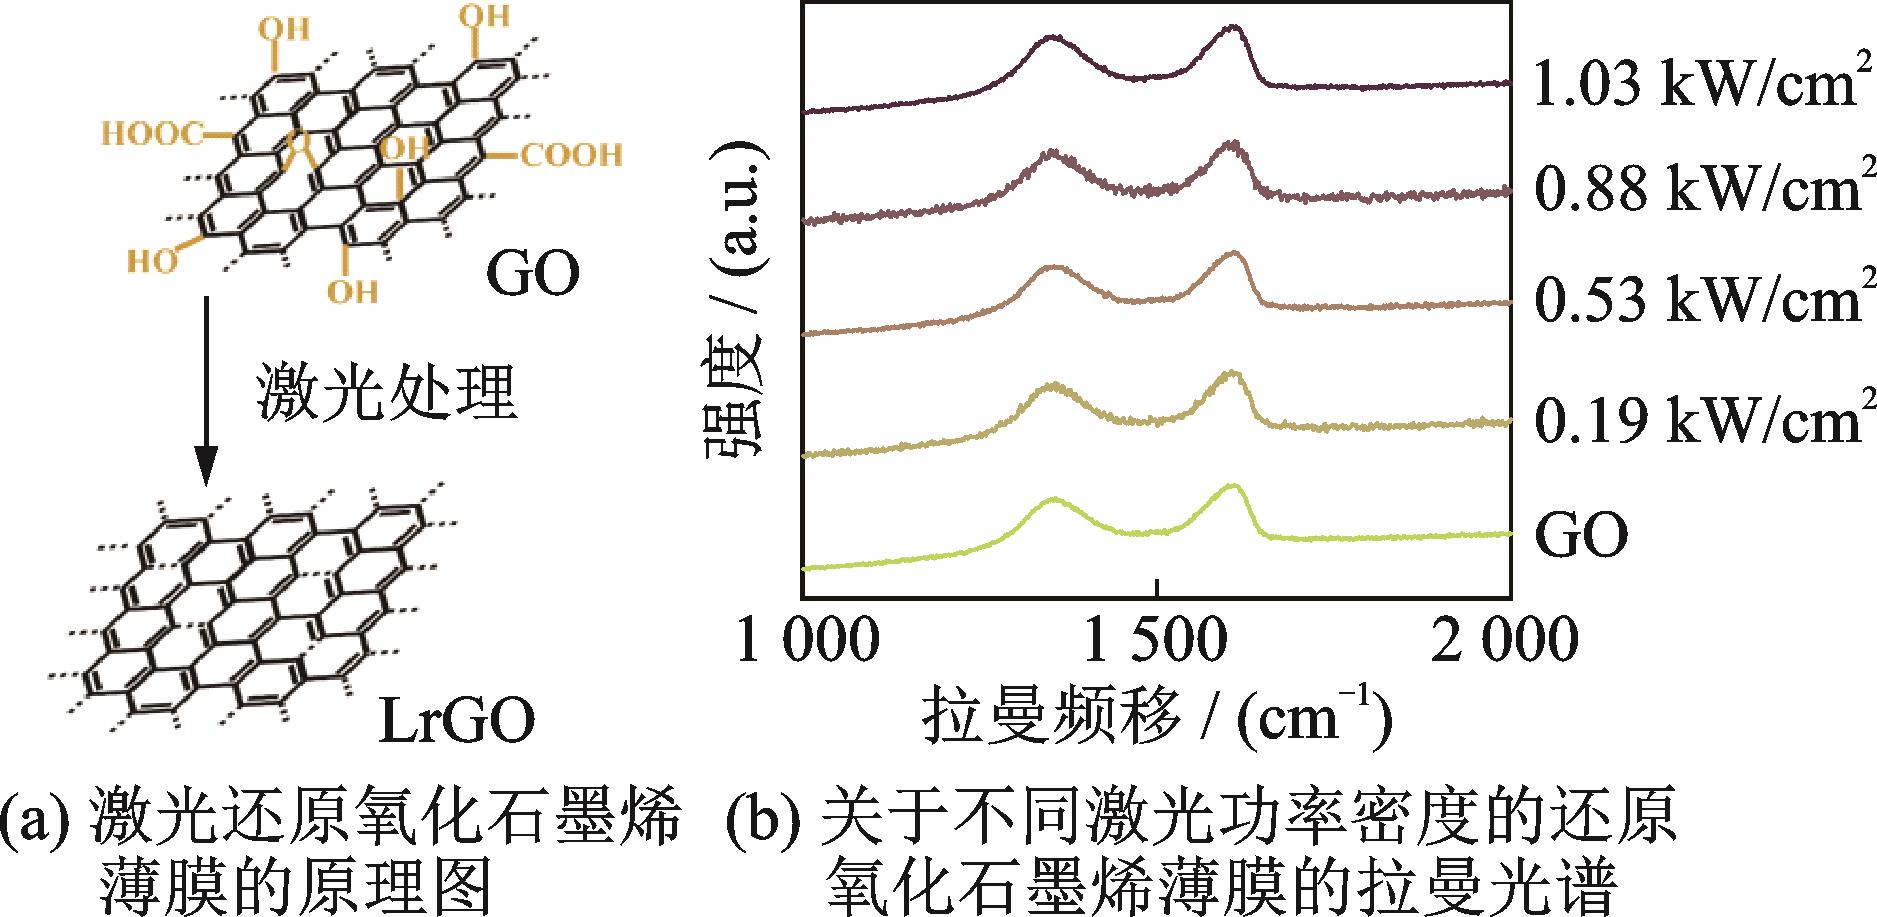 Chemical analysis of reduced graphene oxide thin film